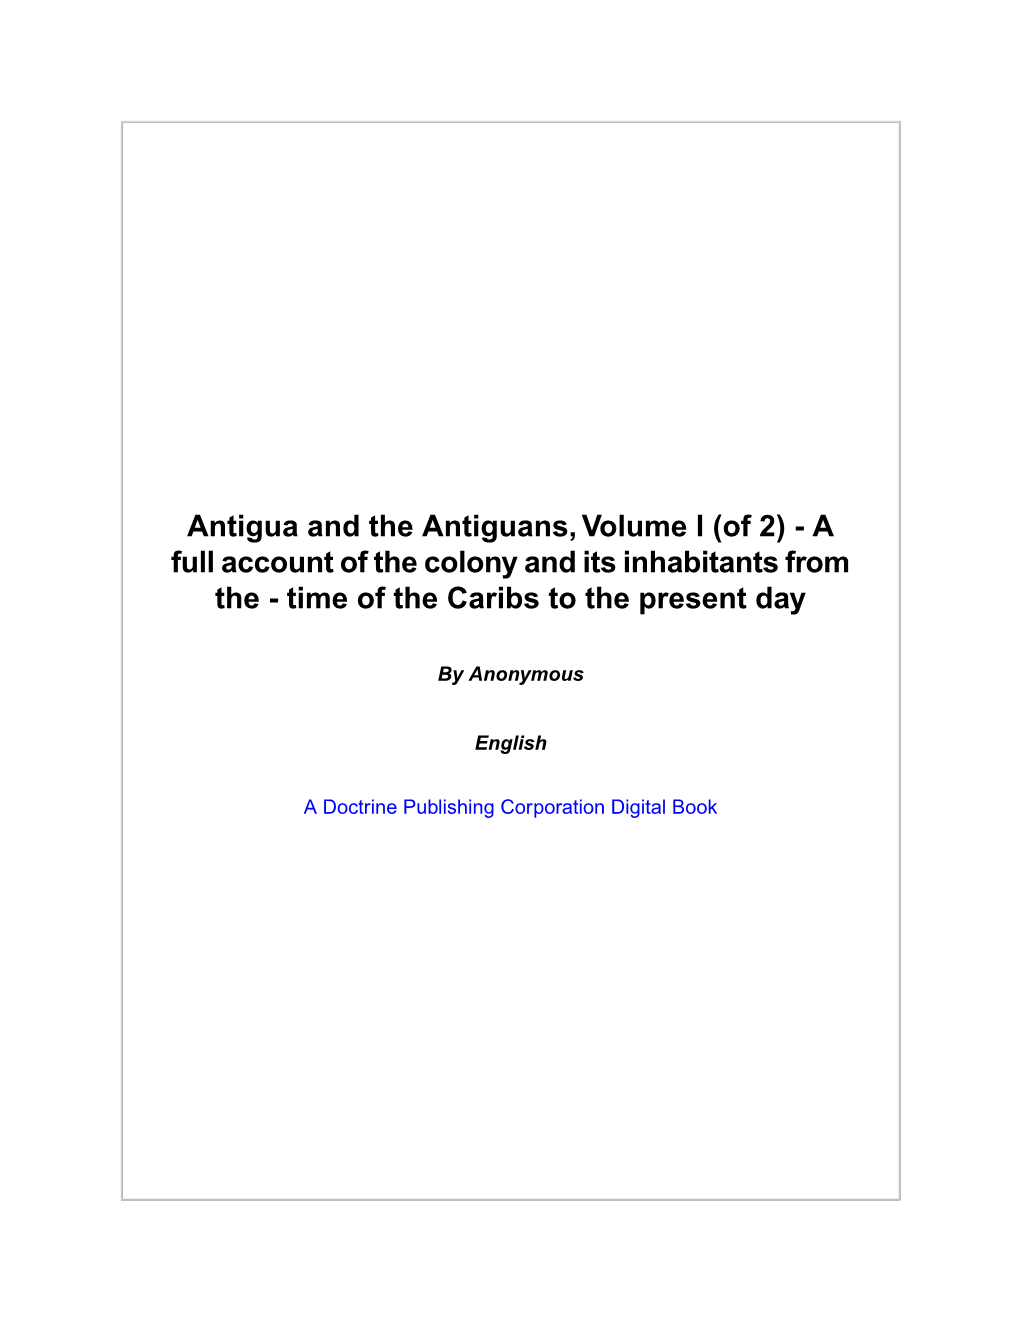 Antigua and the Antiguans, Volume I (Of 2) - a Full Account of the Colony and Its Inhabitants from the - Time of the Caribs to the Present Day